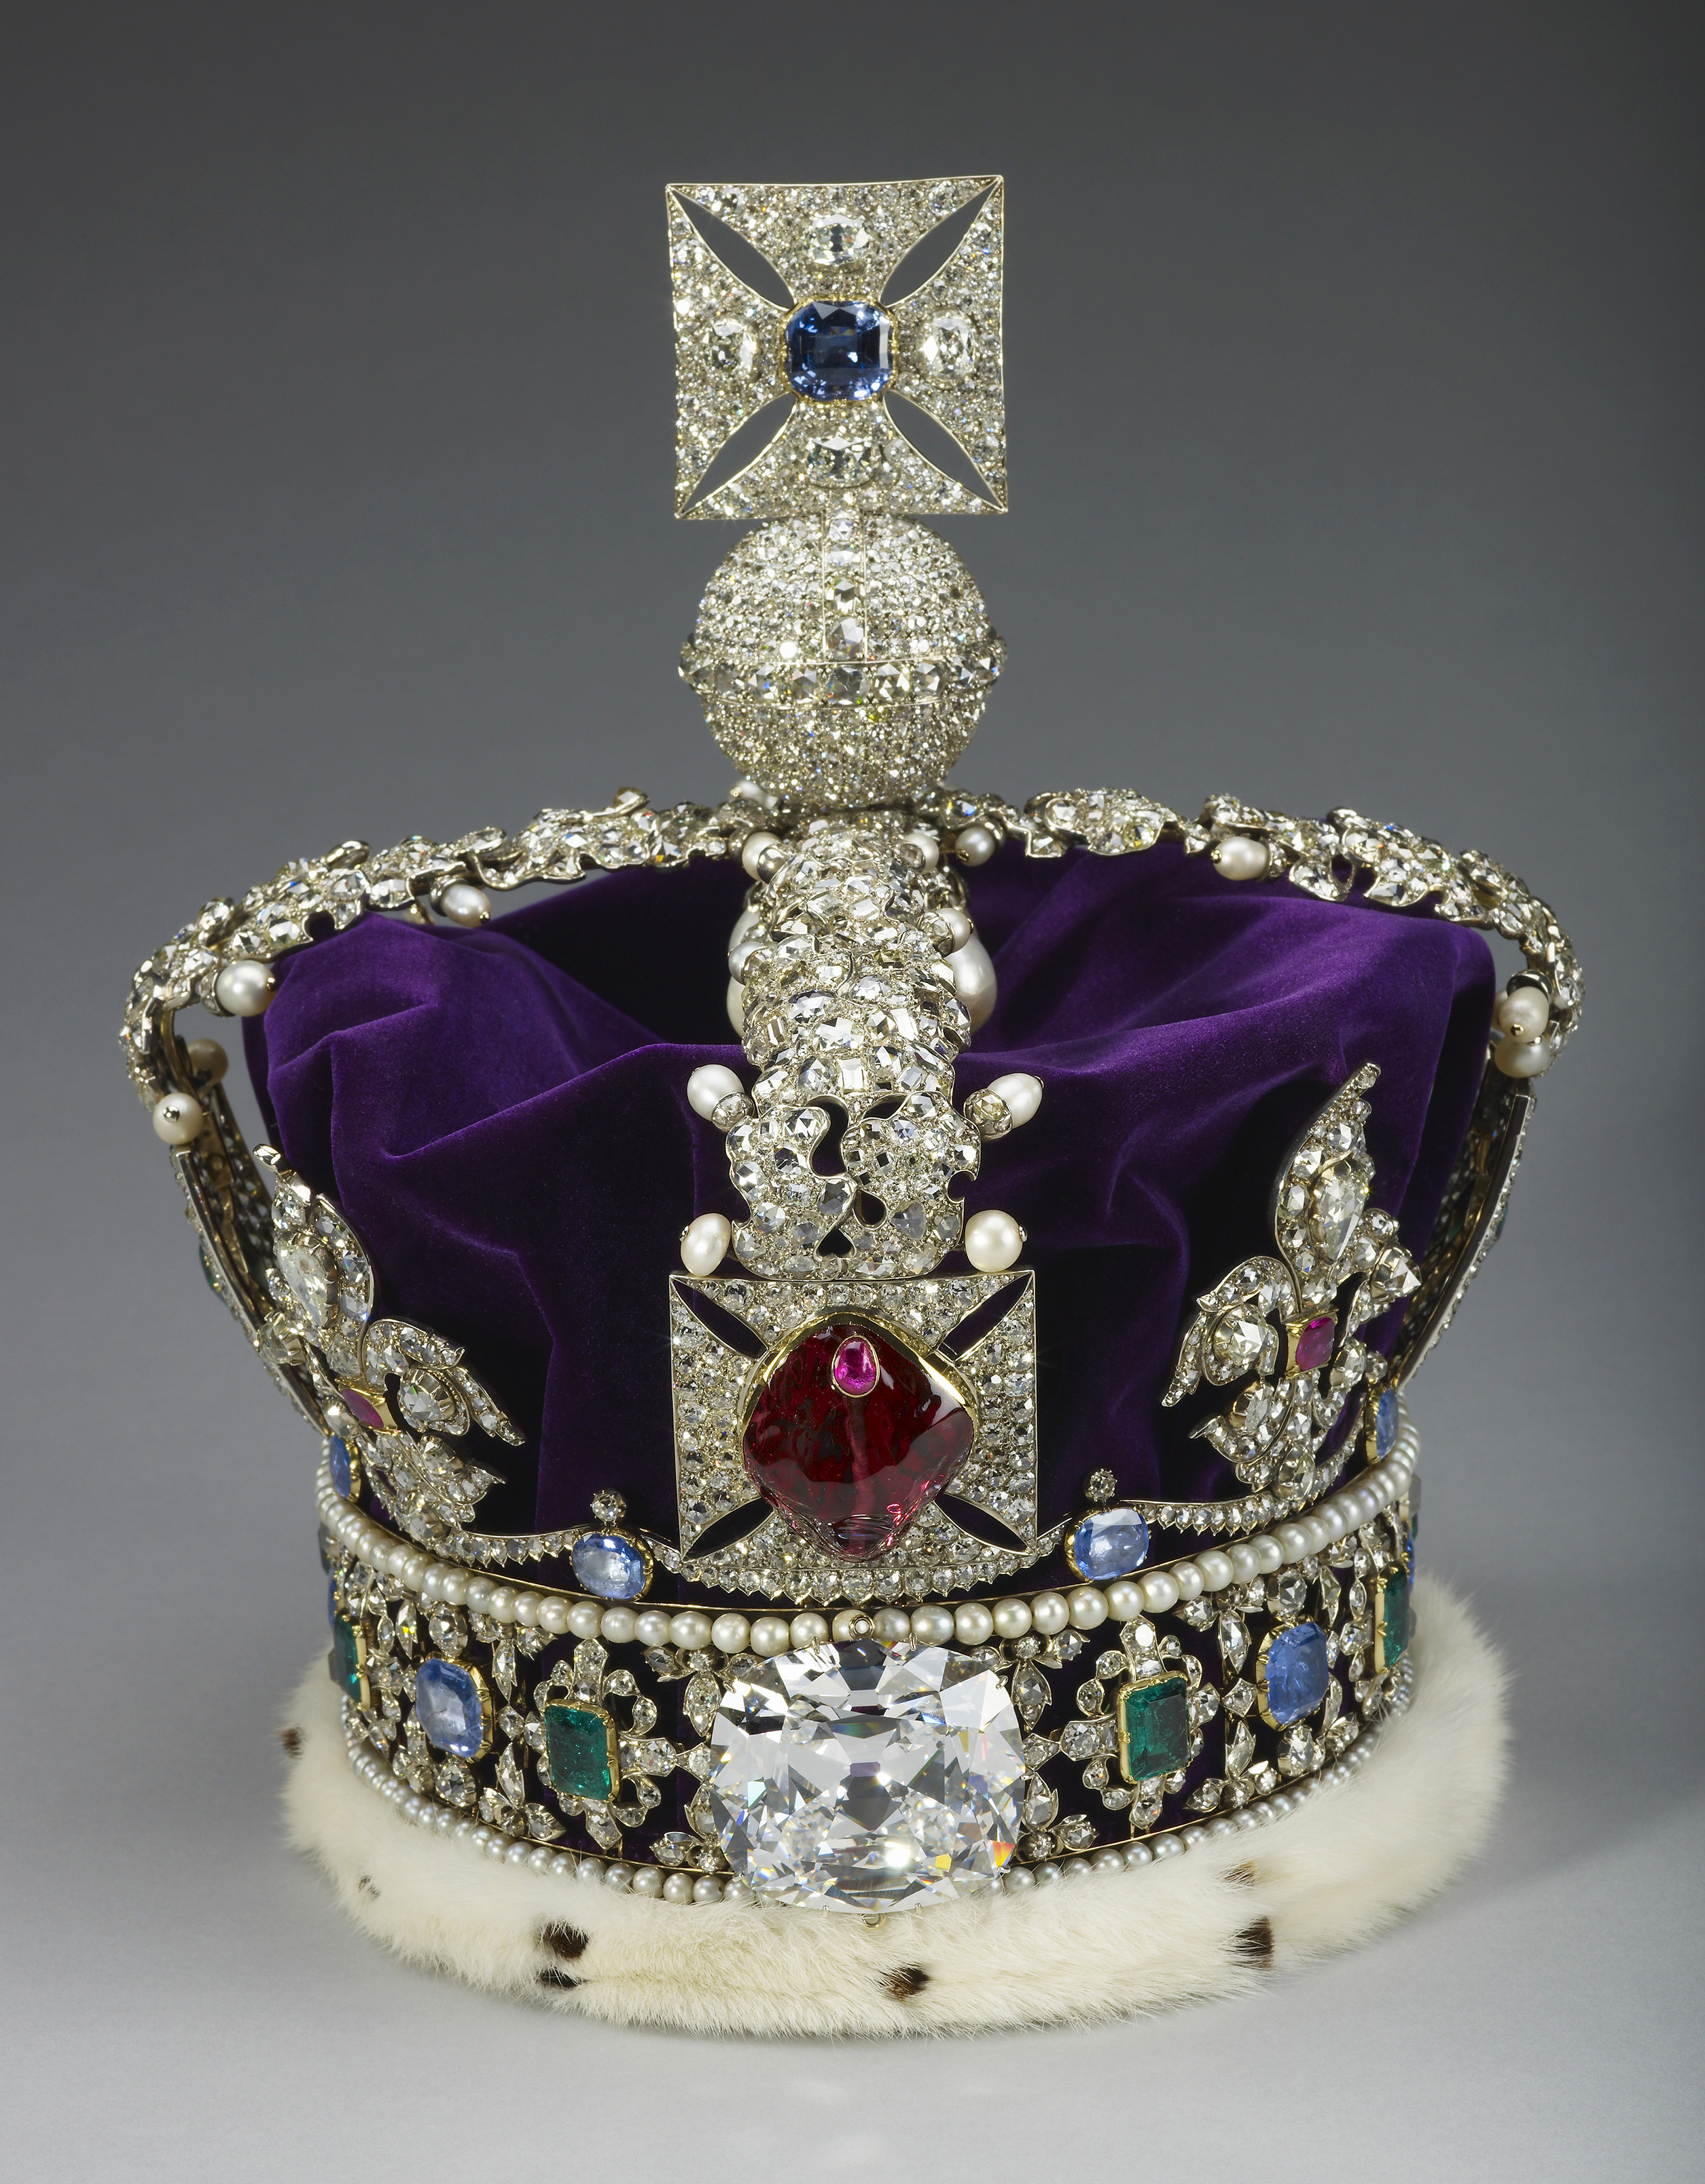 The Imperial State Crown which will be worn by King Charles III on his Coronation. 